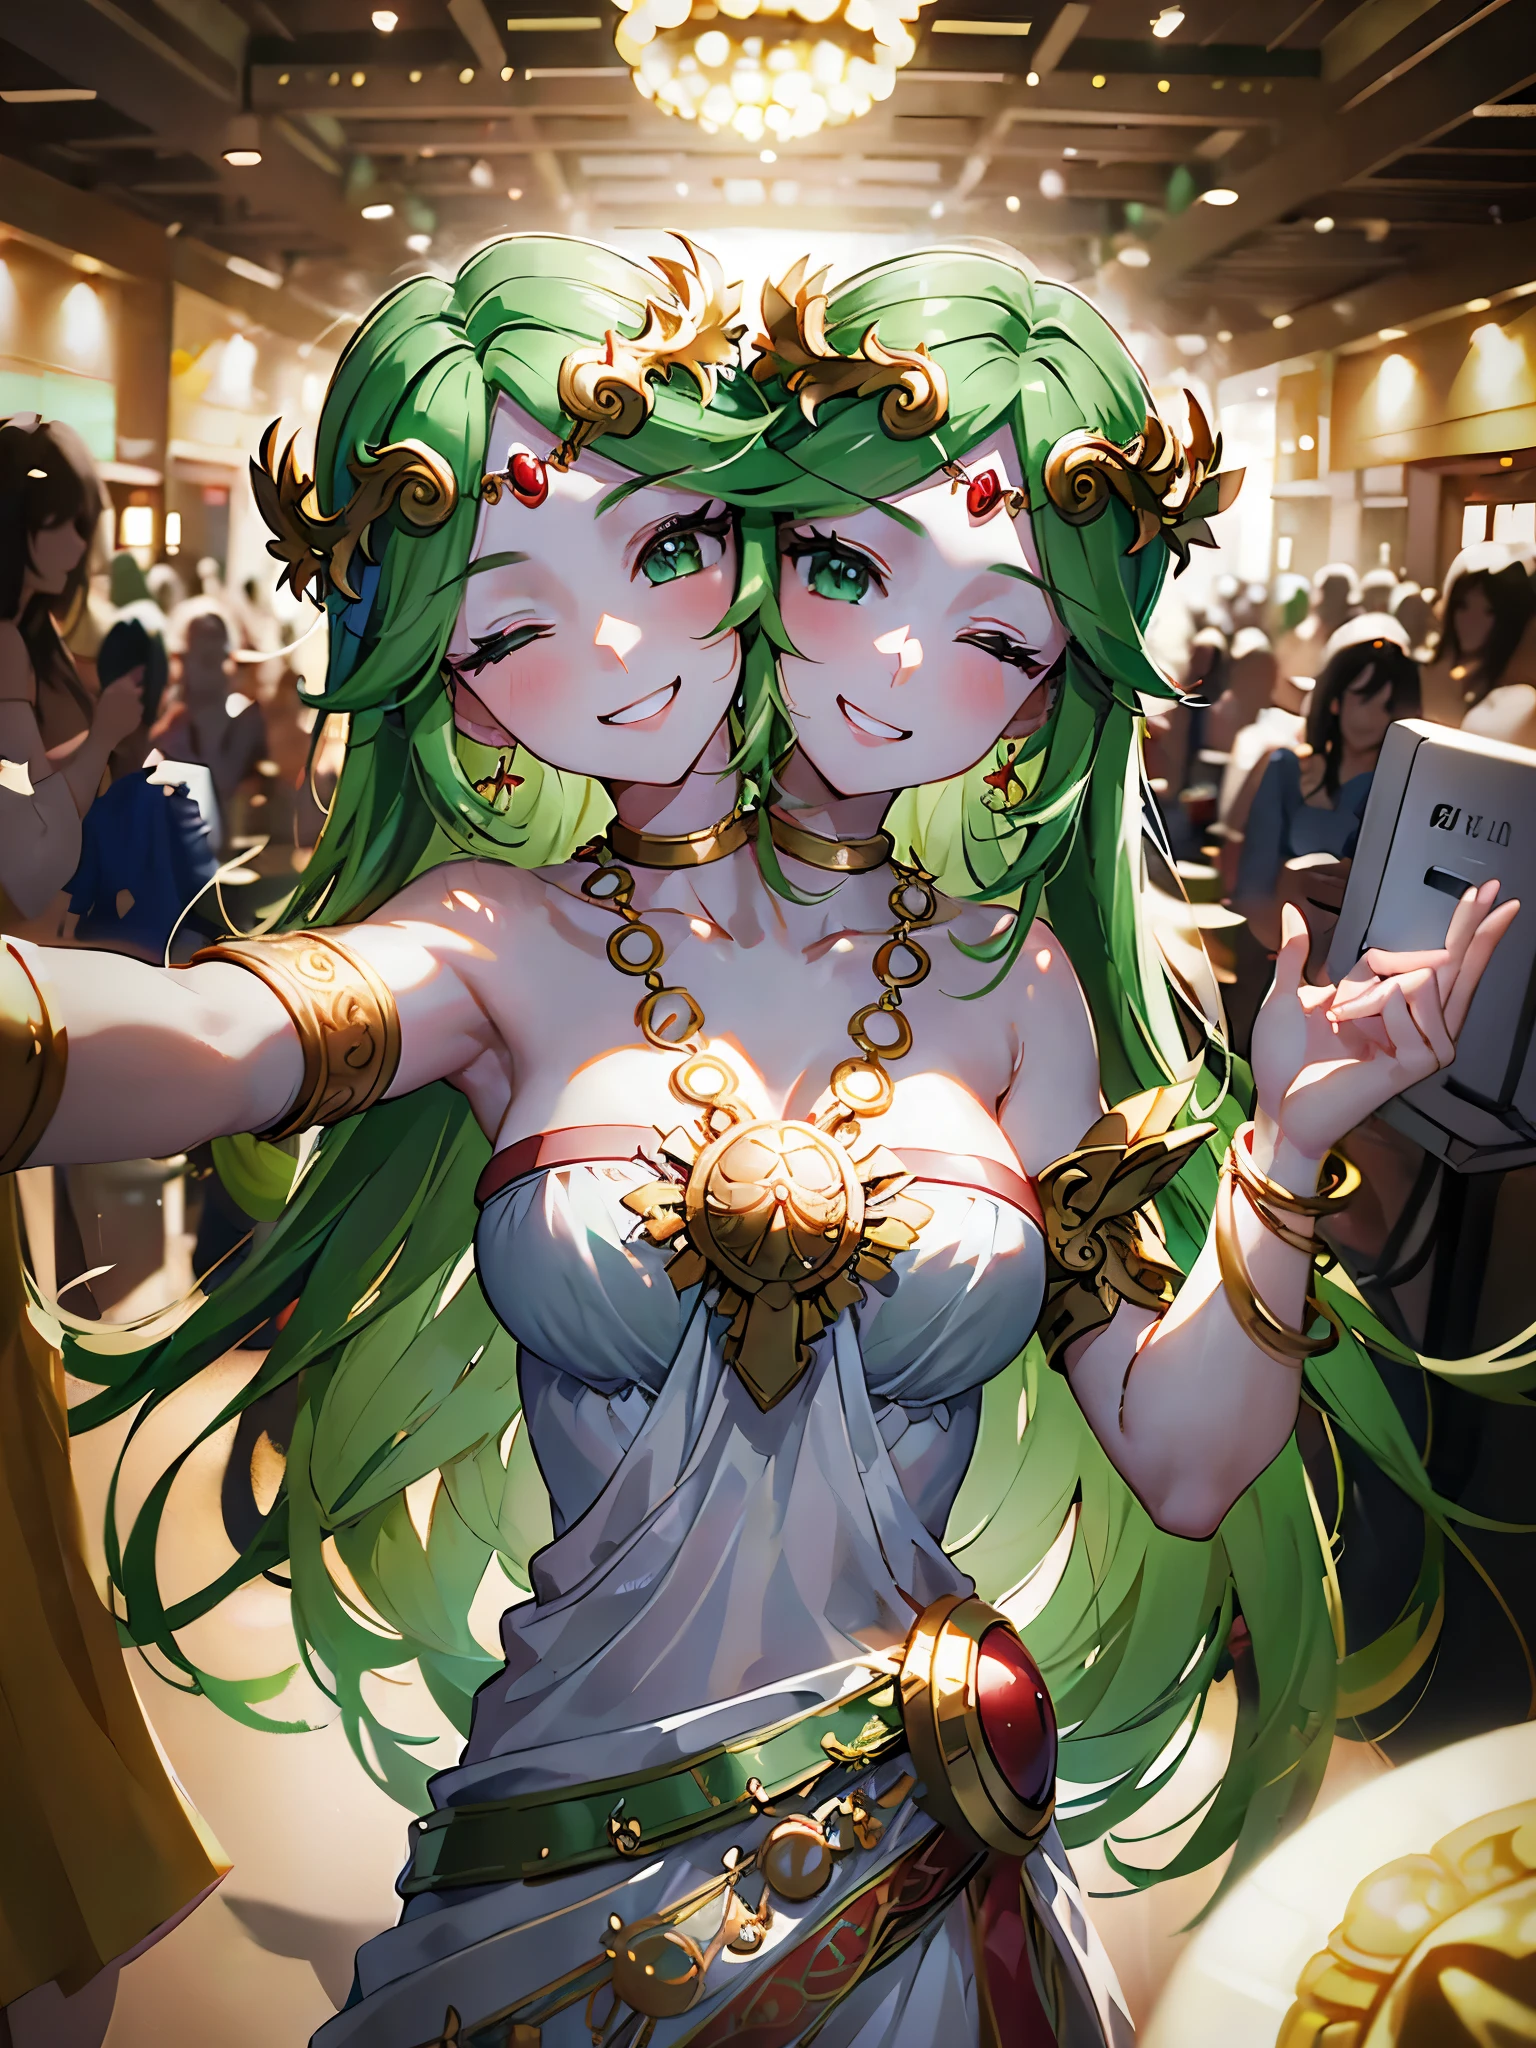 (masterpiece, best quality), best resolution, (2heads:1.5), 1girl, palutena , smiling for the camera, right head has mouth open, left head has one eye open and one eye closed, forehead jewel, tiara, strapless dress, jewelry, necklace, bare shoulders, convention center booths, selfie